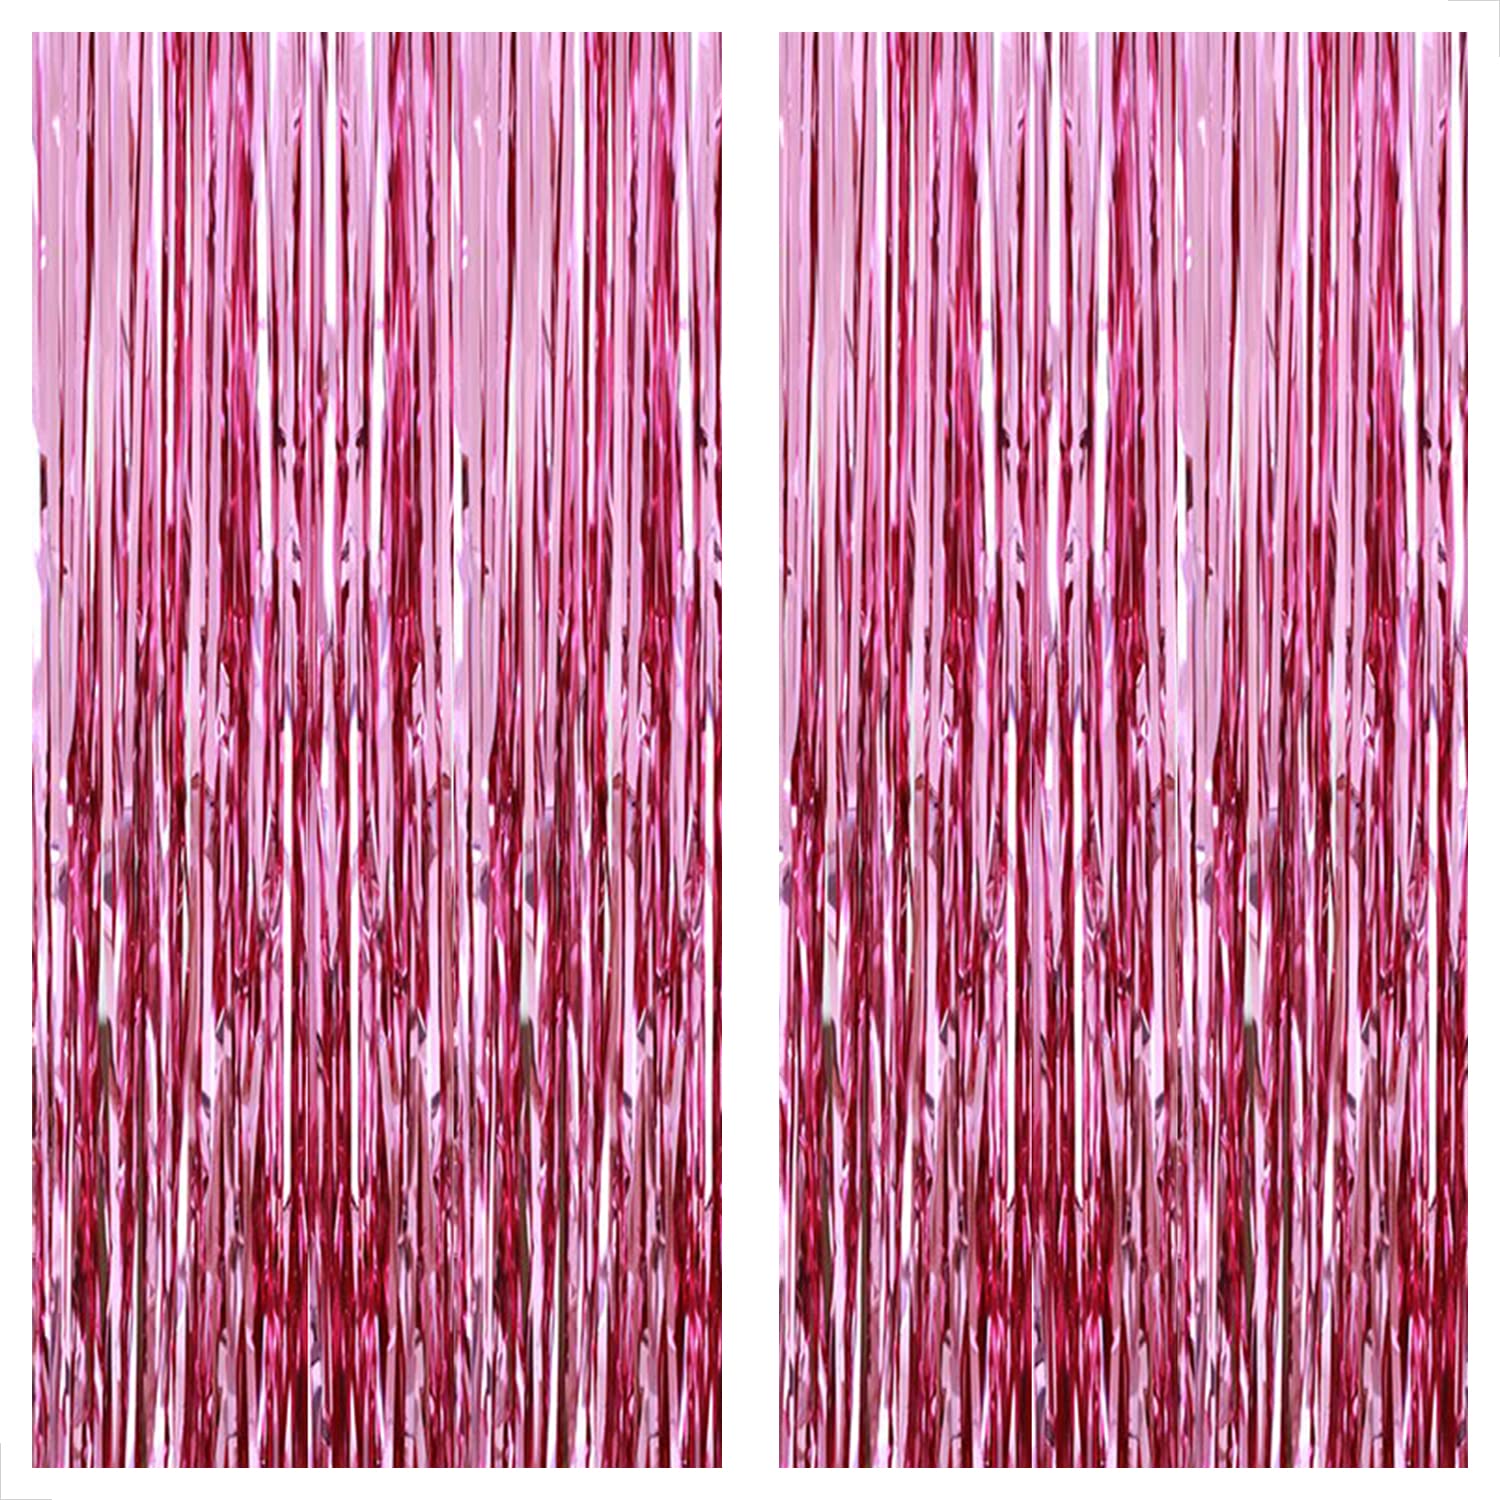 KatchOn, Pink Backdrop for Pink Party Decorations - XtraLarge 8x3.2 Feet, Pack of 2 | Pink Foil Fringe Curtain for Pink Streamers Party Decorations | Pink Fringe Backdrop, Galentines Day Decorations